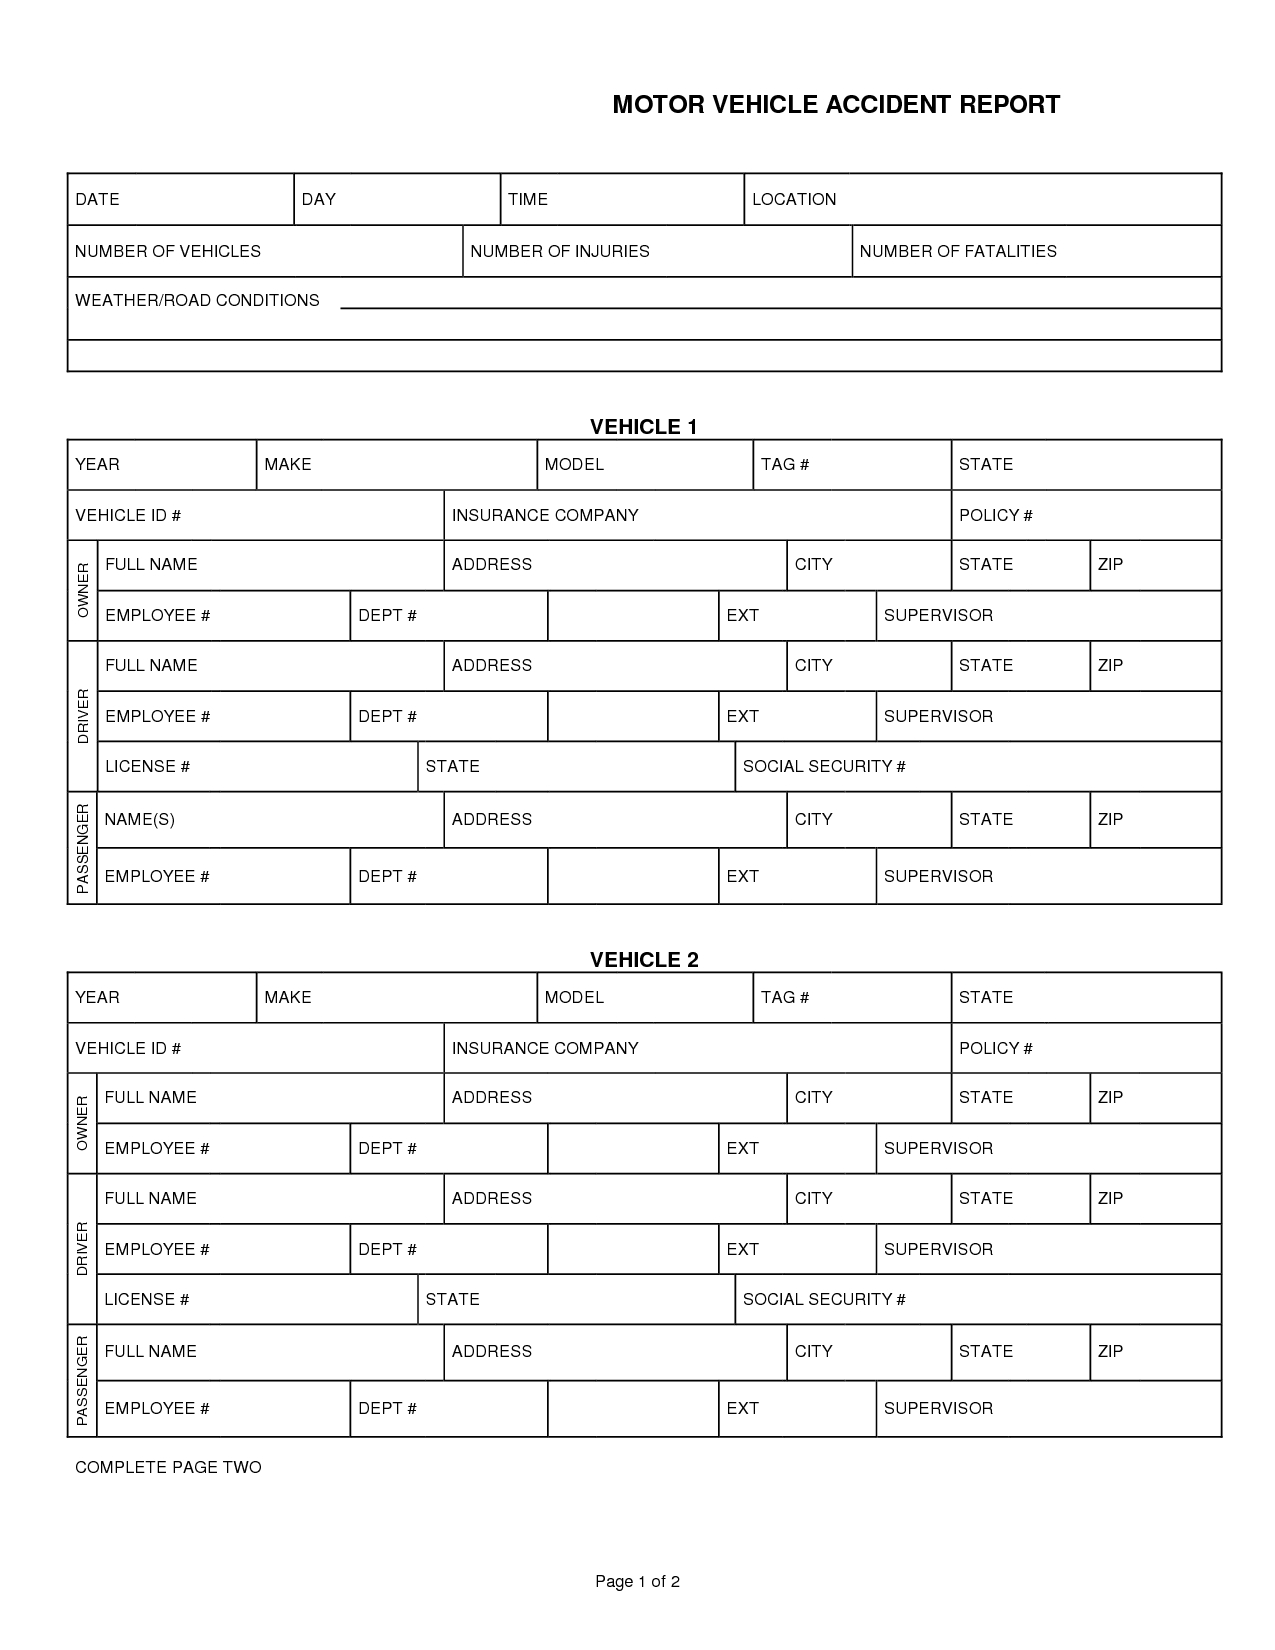 010 Template Ideas Car Accident Report Form 290132 Intended For Motor Vehicle Accident Report Form Template